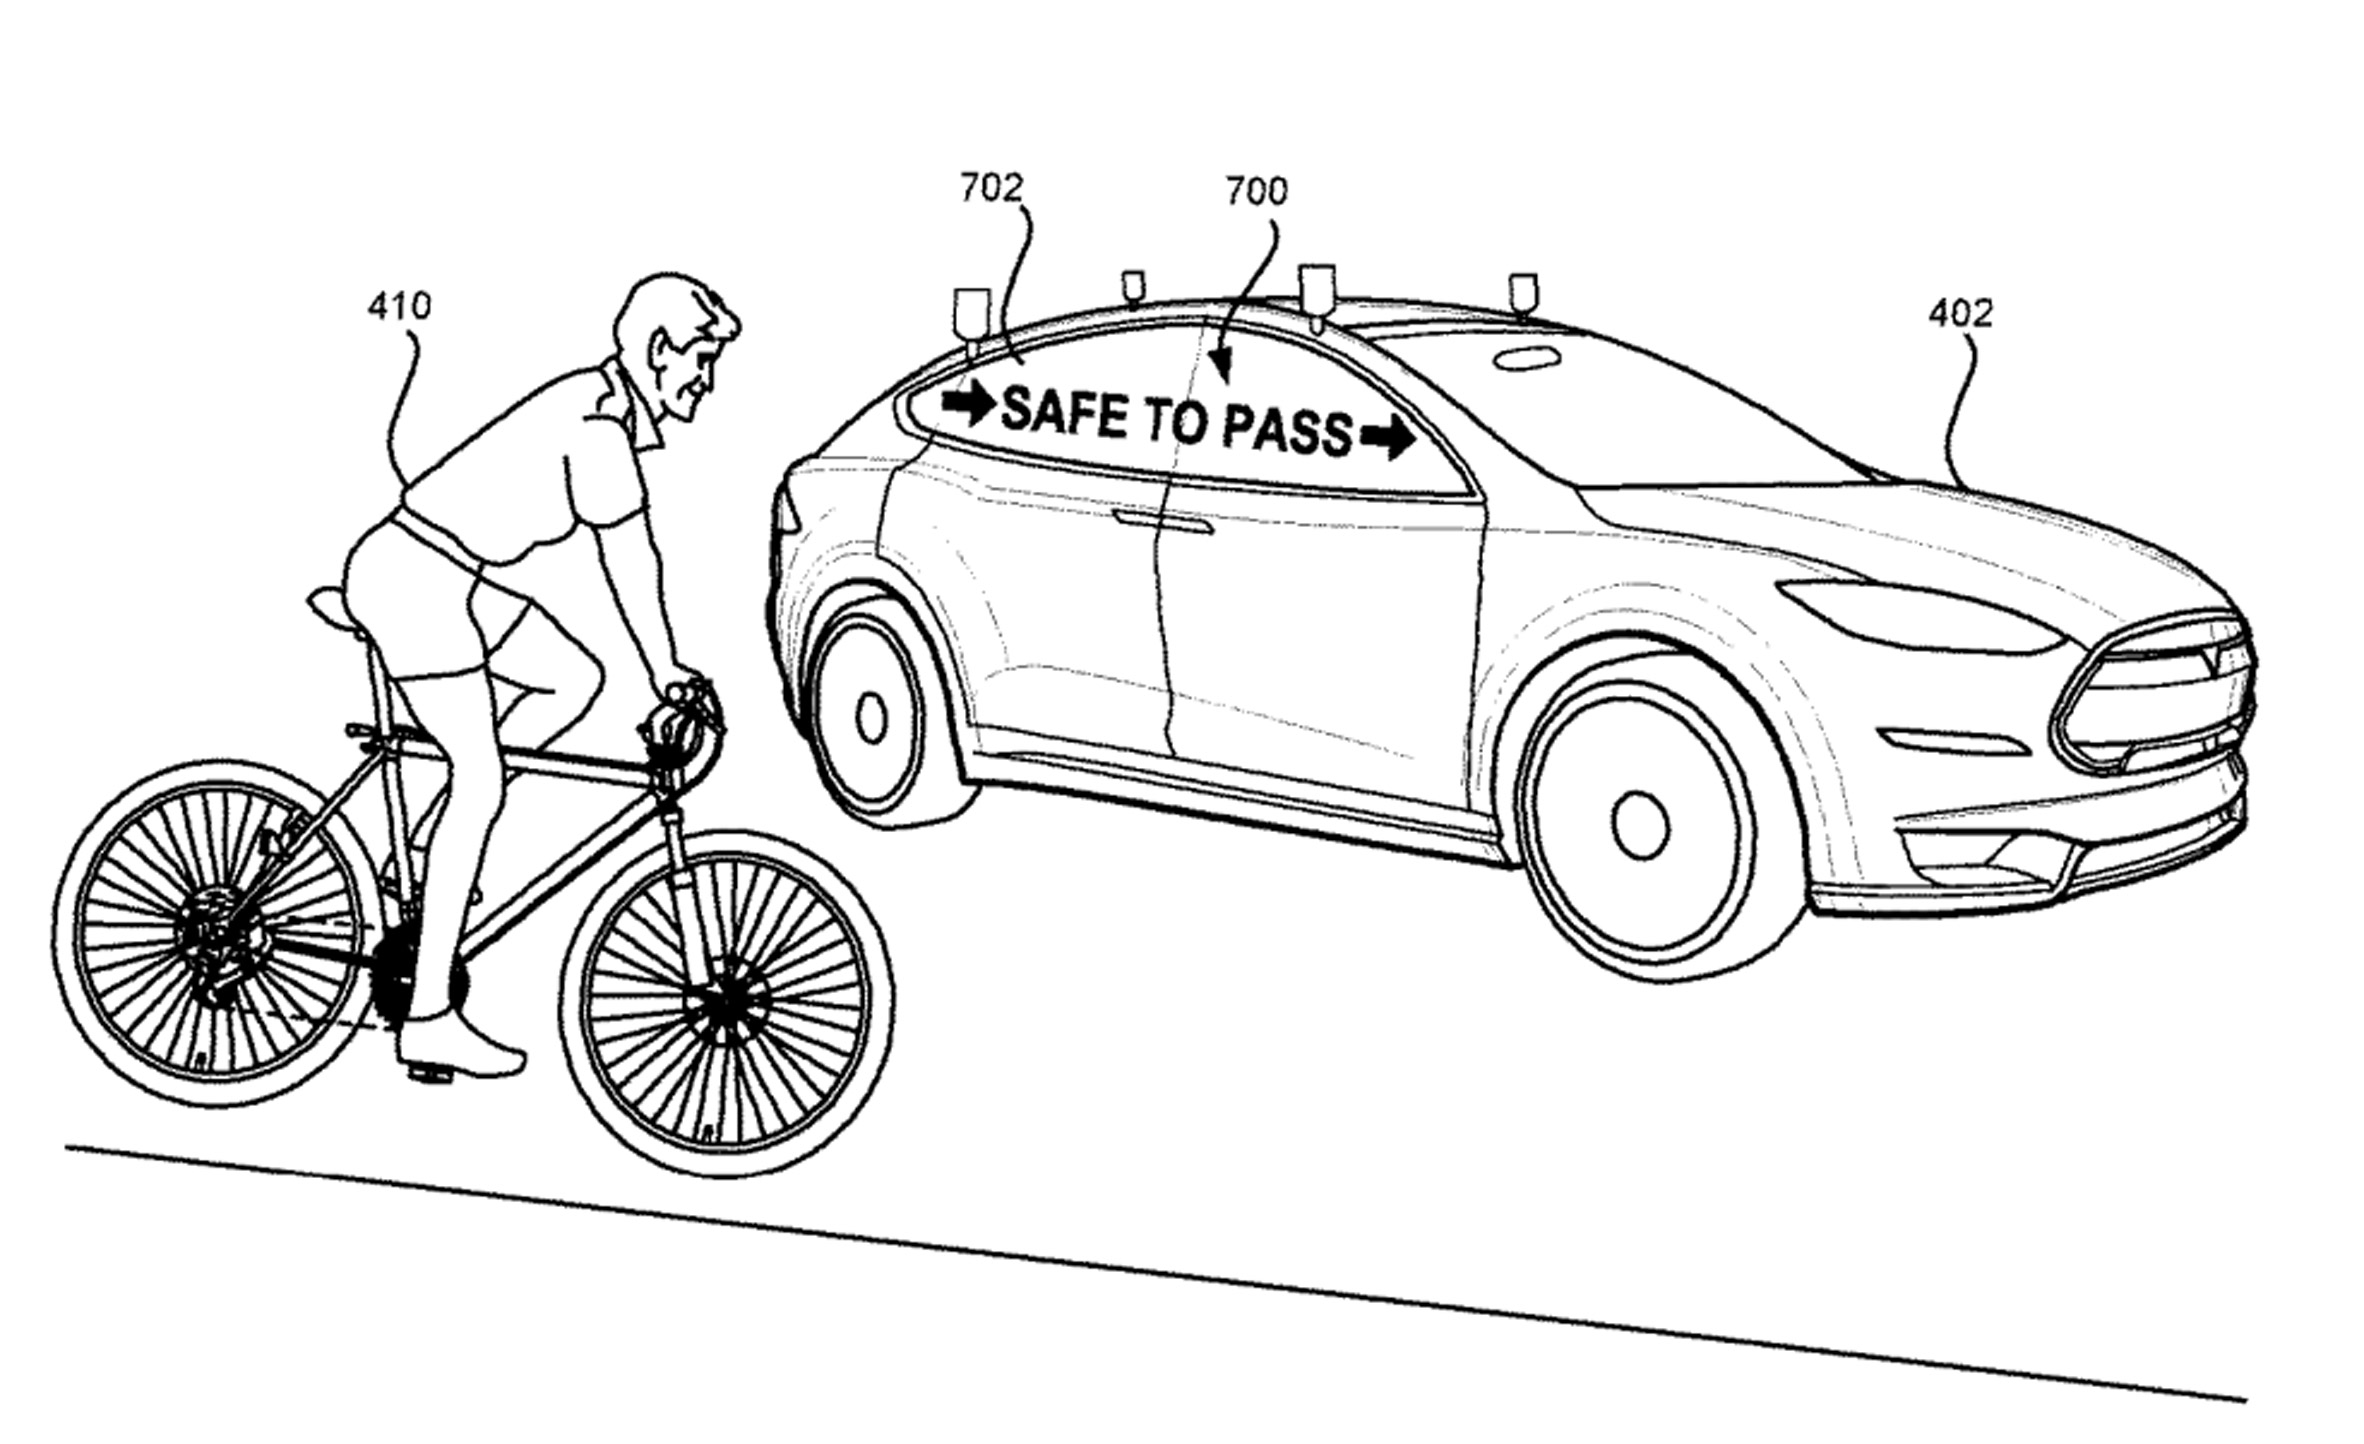 Lyft patents notification system for self-driving cars to communicate with pedestrians